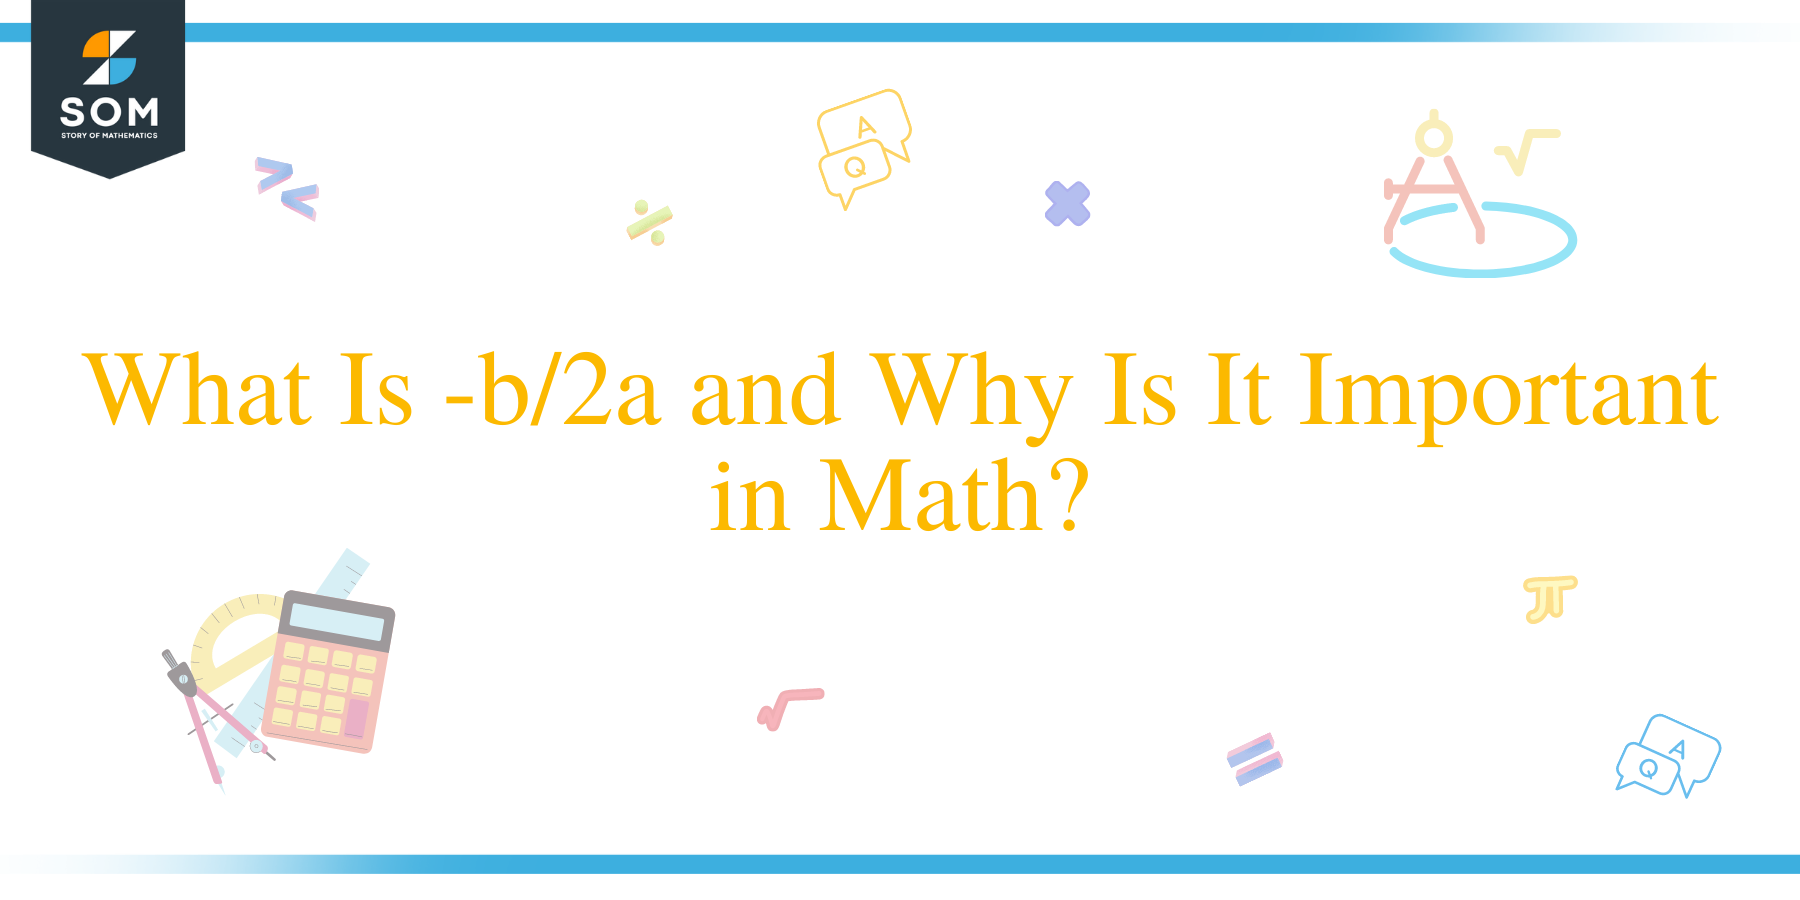 What Is -b/2a and Why Is It Important in Math?